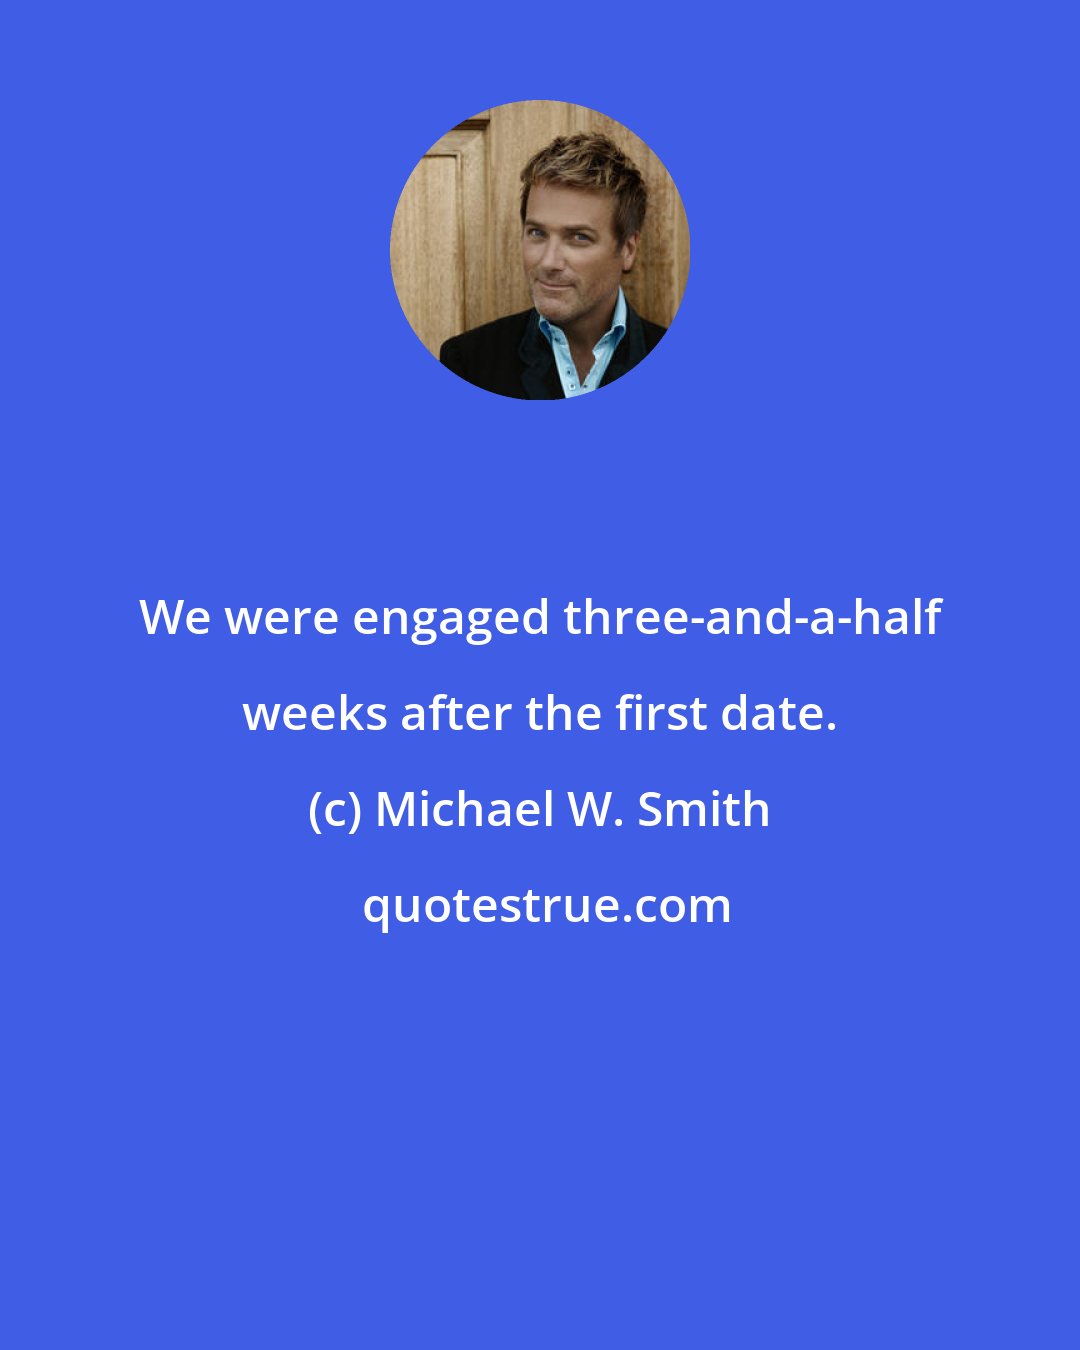 Michael W. Smith: We were engaged three-and-a-half weeks after the first date.